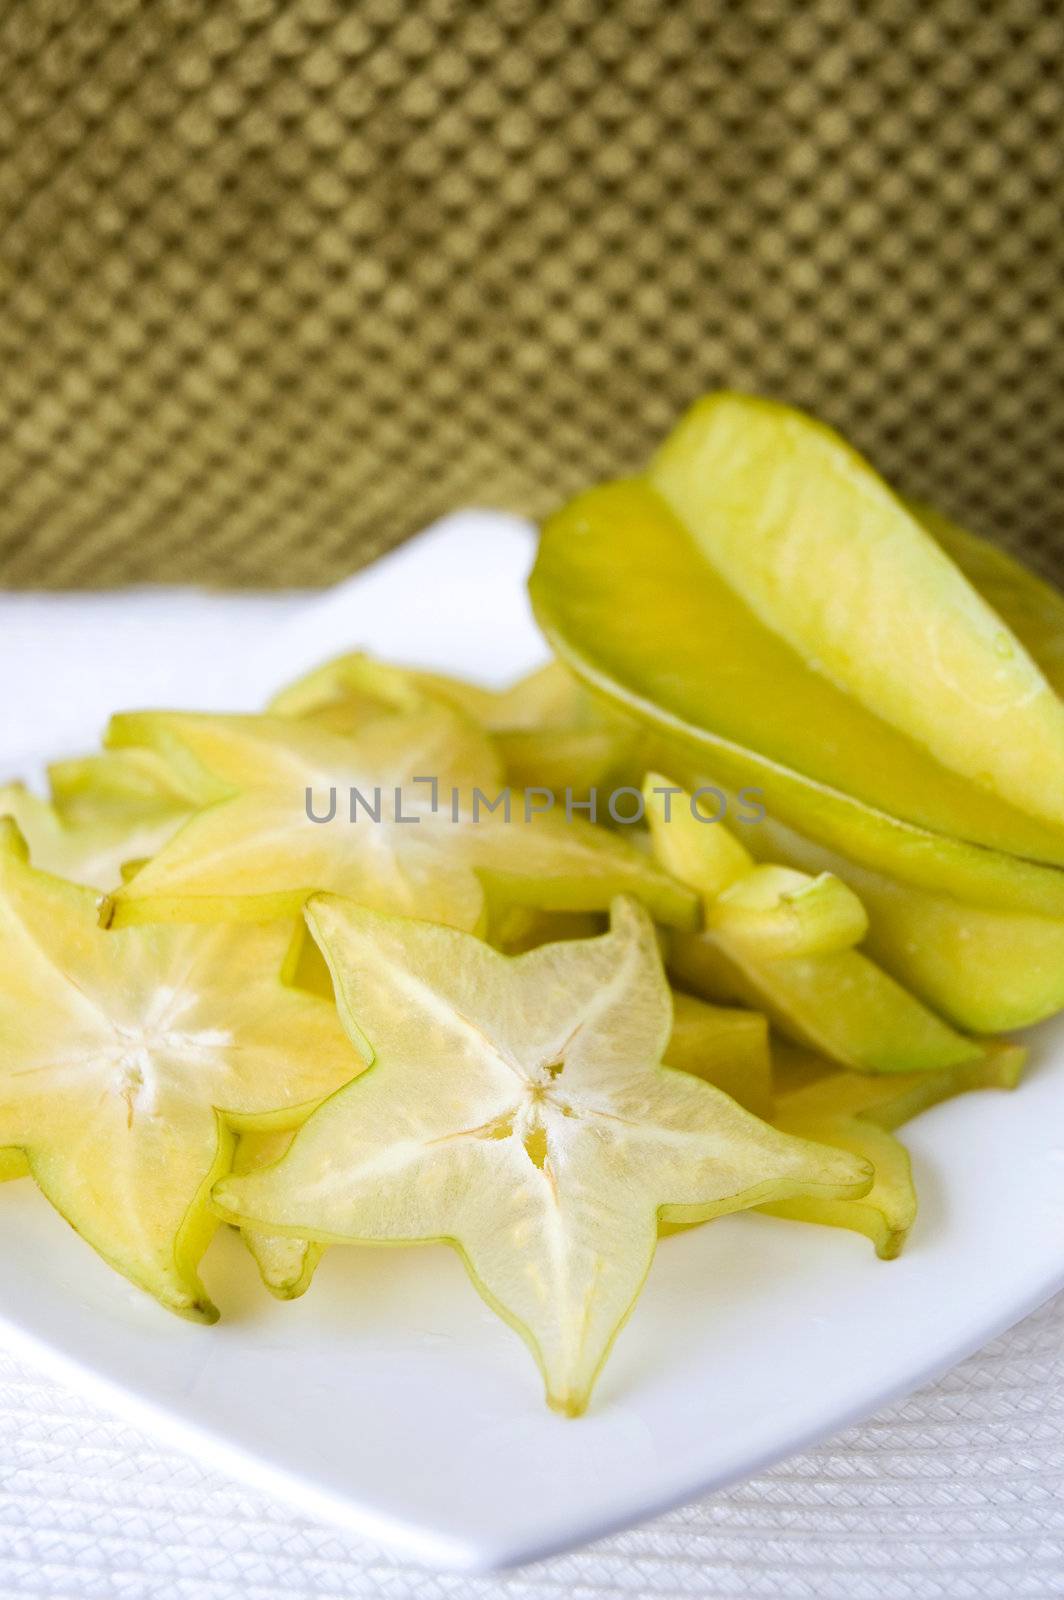 sliced carambola, starfruit serve on white plate with green texture background